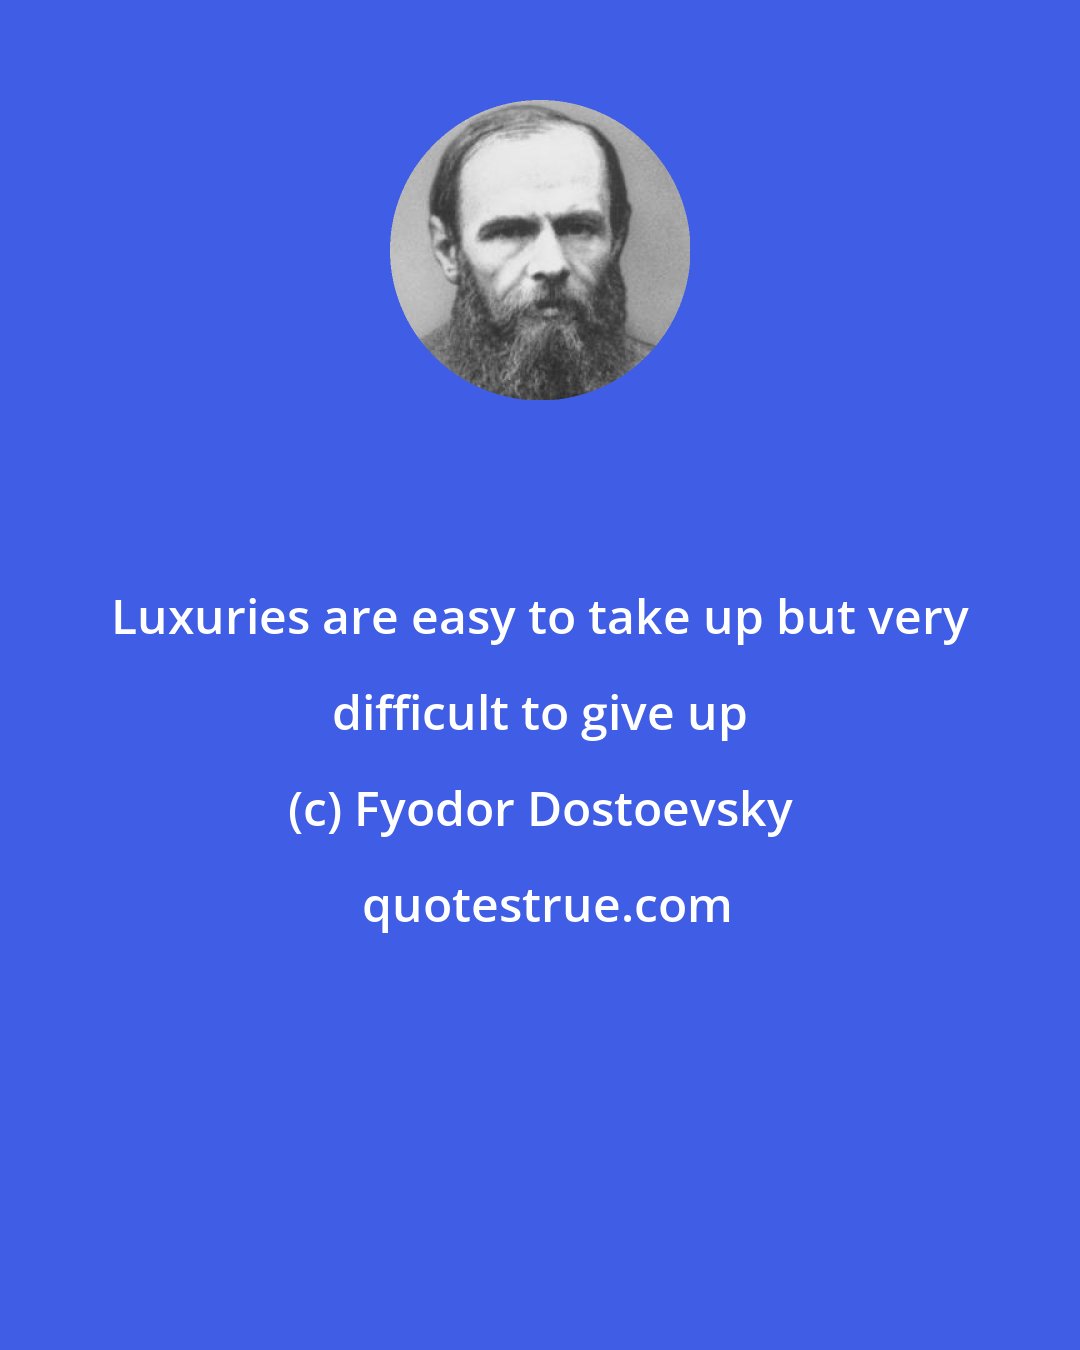 Fyodor Dostoevsky: Luxuries are easy to take up but very difficult to give up